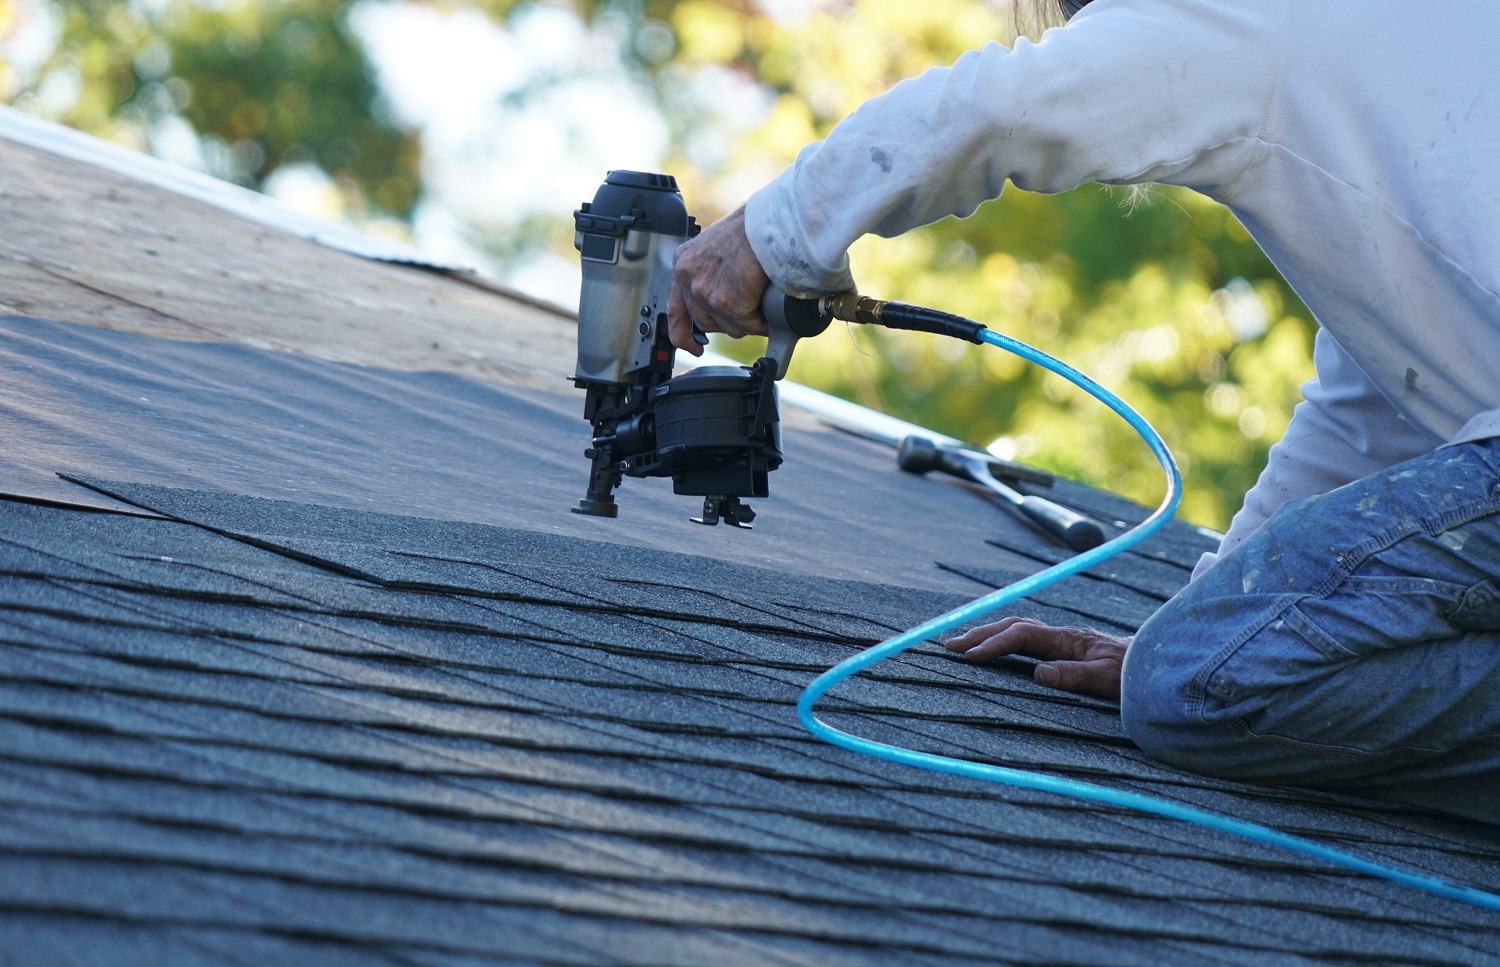 Reliable Shingle Roof Replacement Service in San Diego